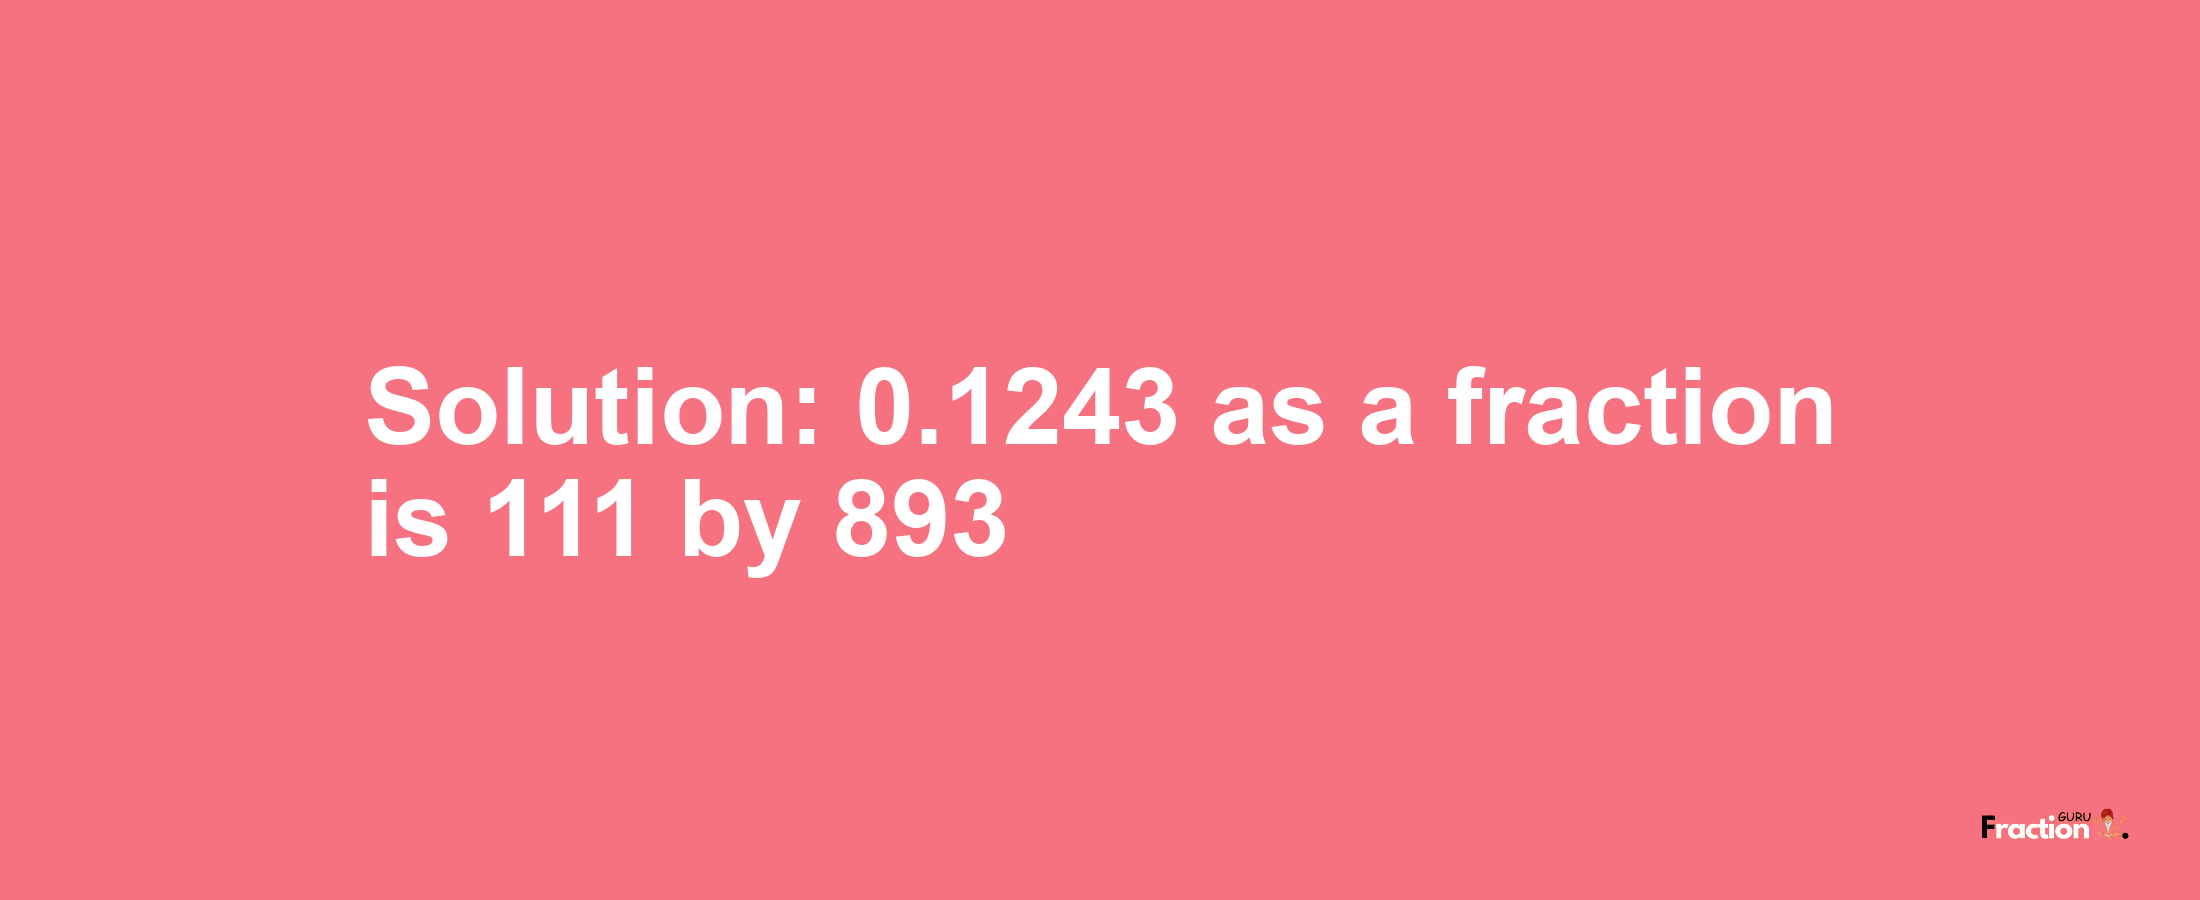 Solution:0.1243 as a fraction is 111/893